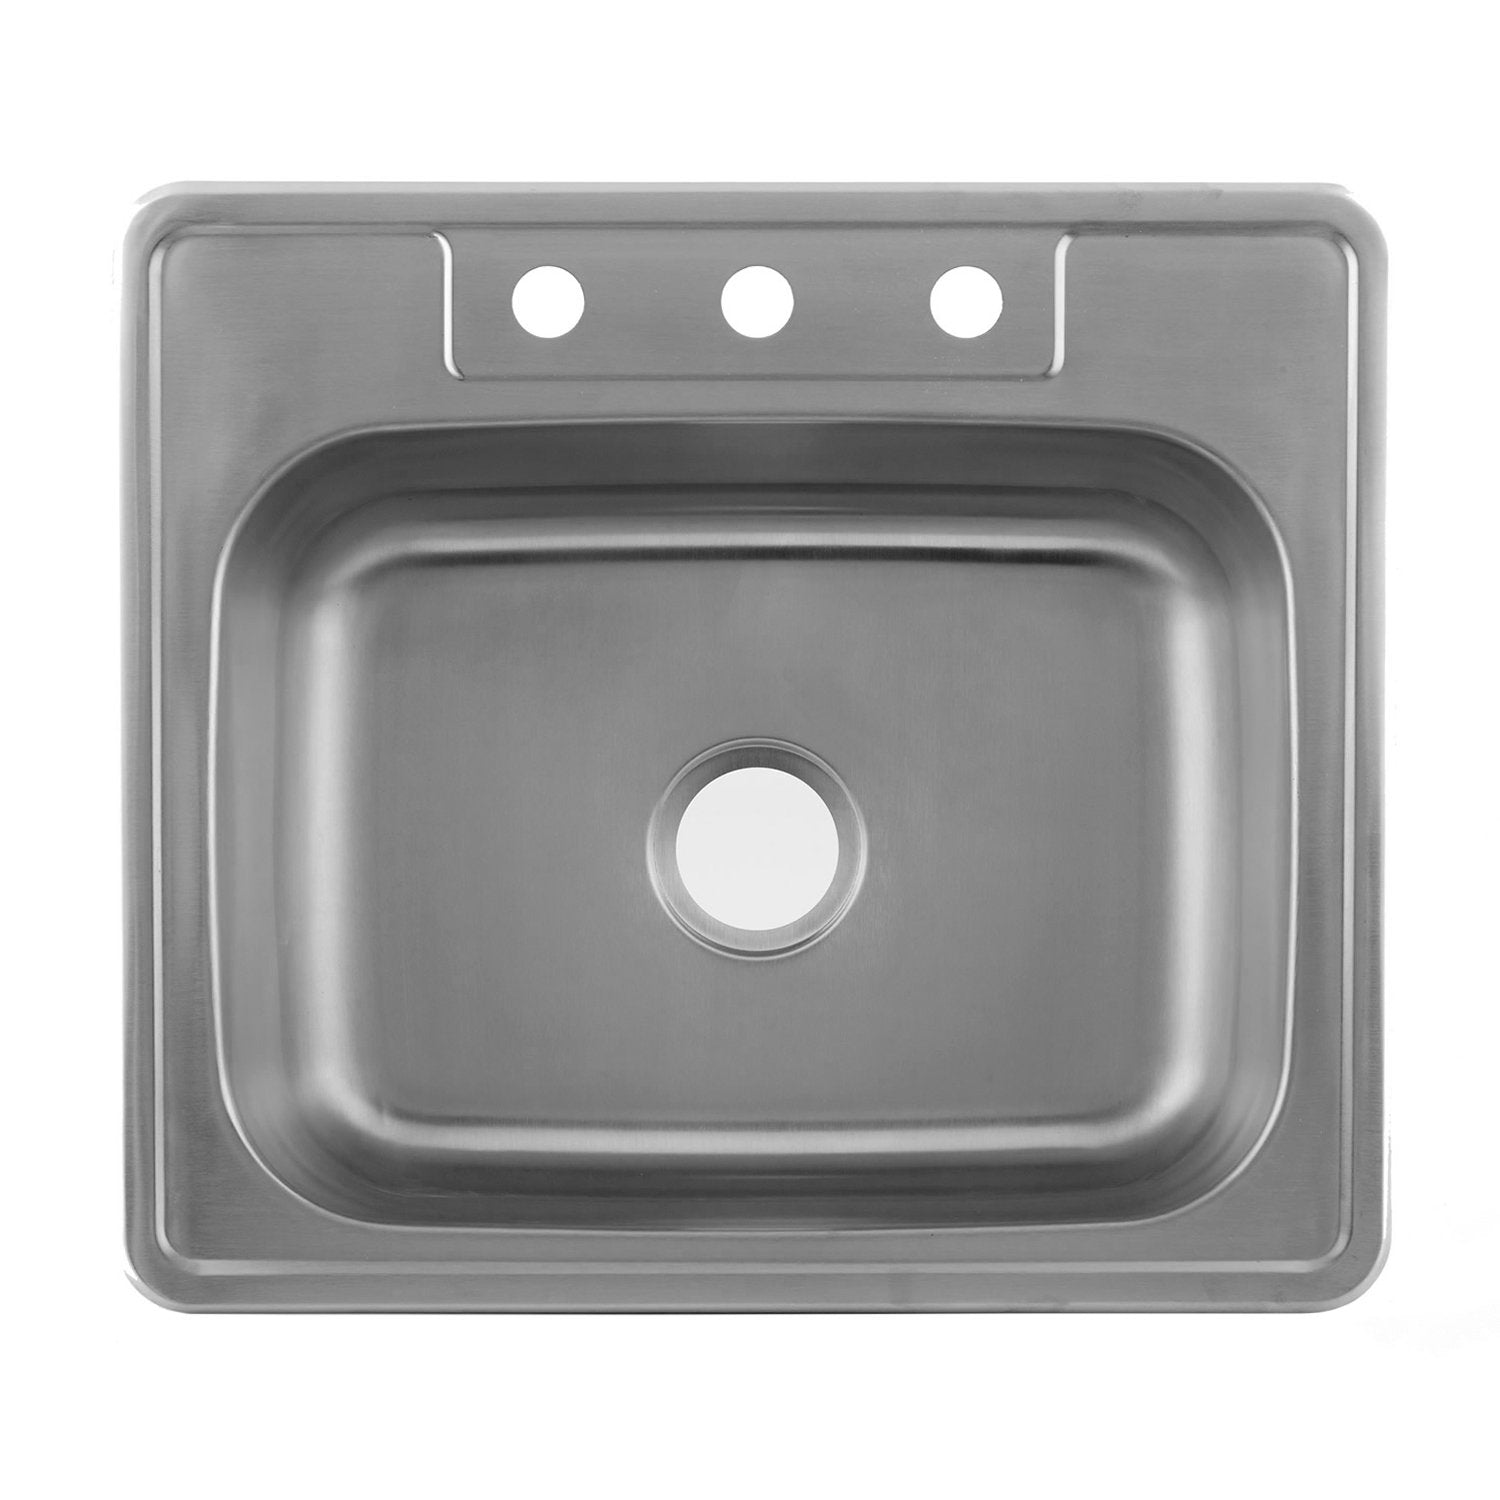 DAX Single Bowl Top Mount Kitchen Sink, 20 Gauge Stainless Steel, Brushed Finish , 25 x 22 x 8 Inches (KA-OM2522)